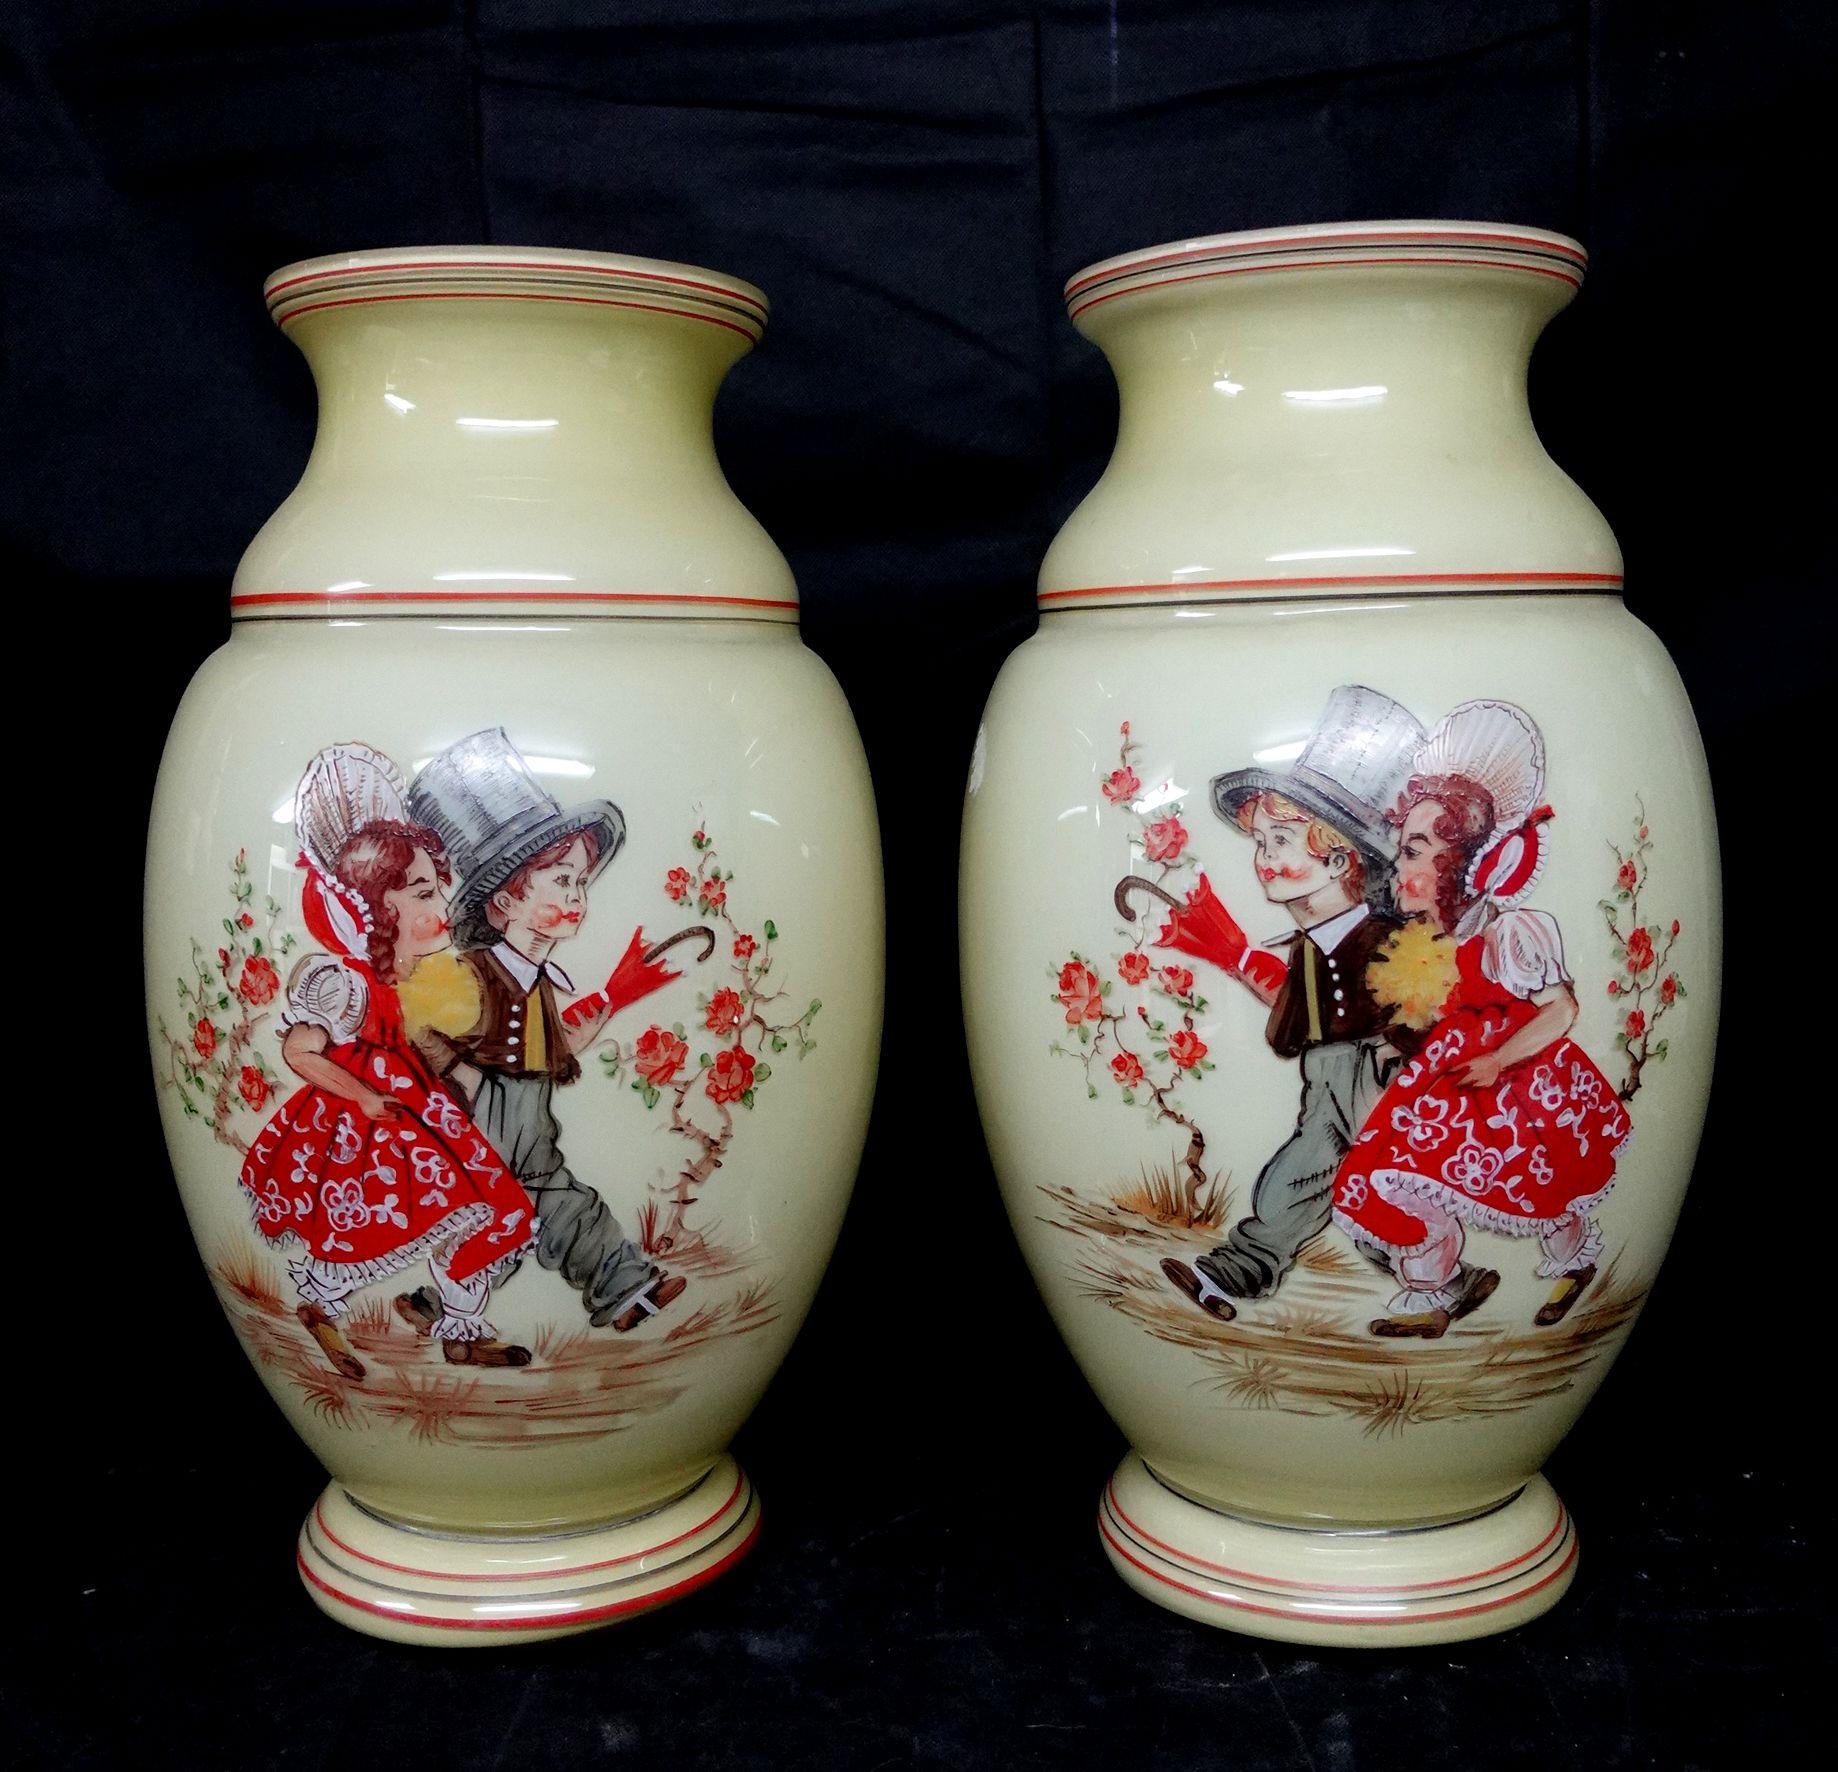 Antique Large Hand Painted Bristol glass vases, Ric072.